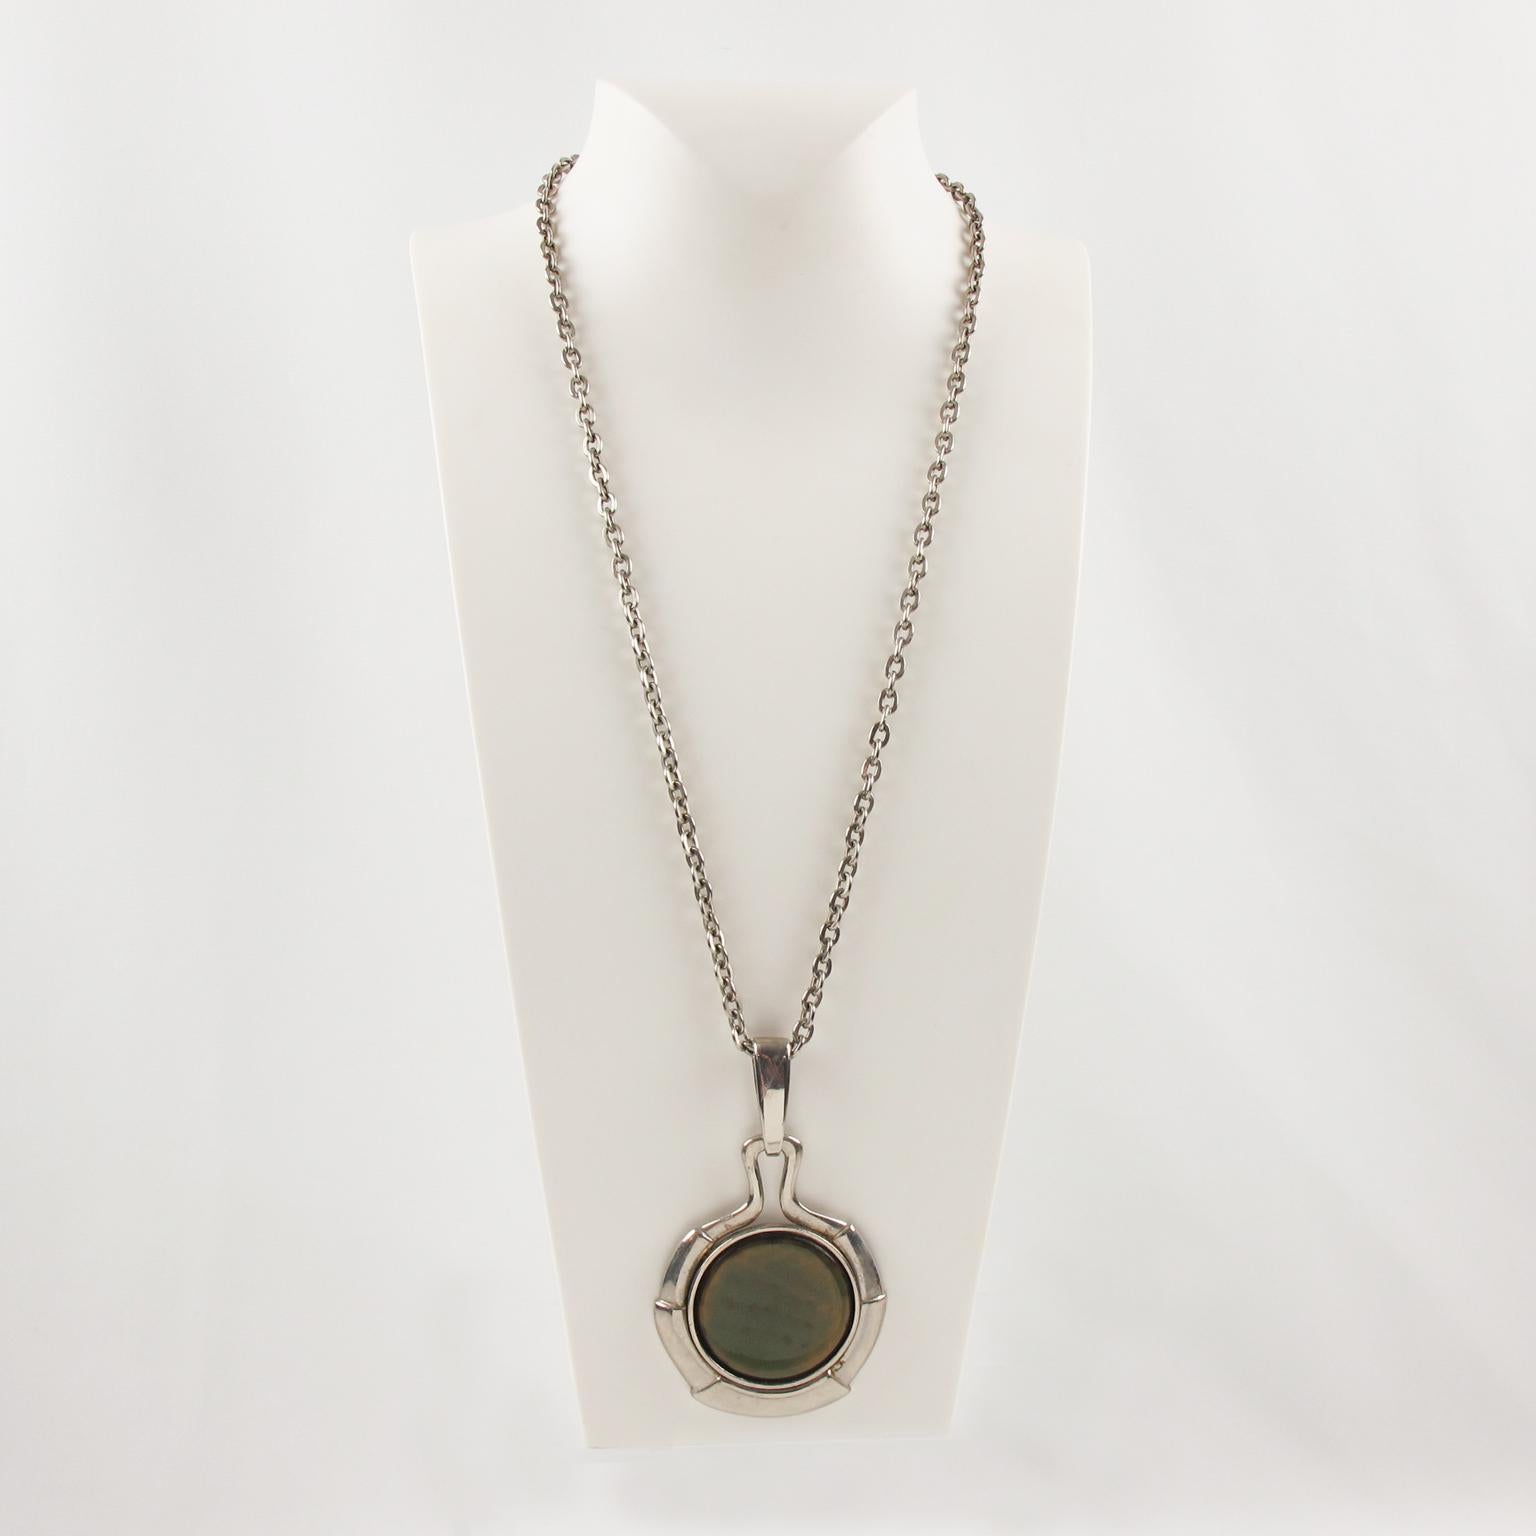 Space Age Modernist Necklace Green Iridescent Resin Pendant In Excellent Condition For Sale In Atlanta, GA